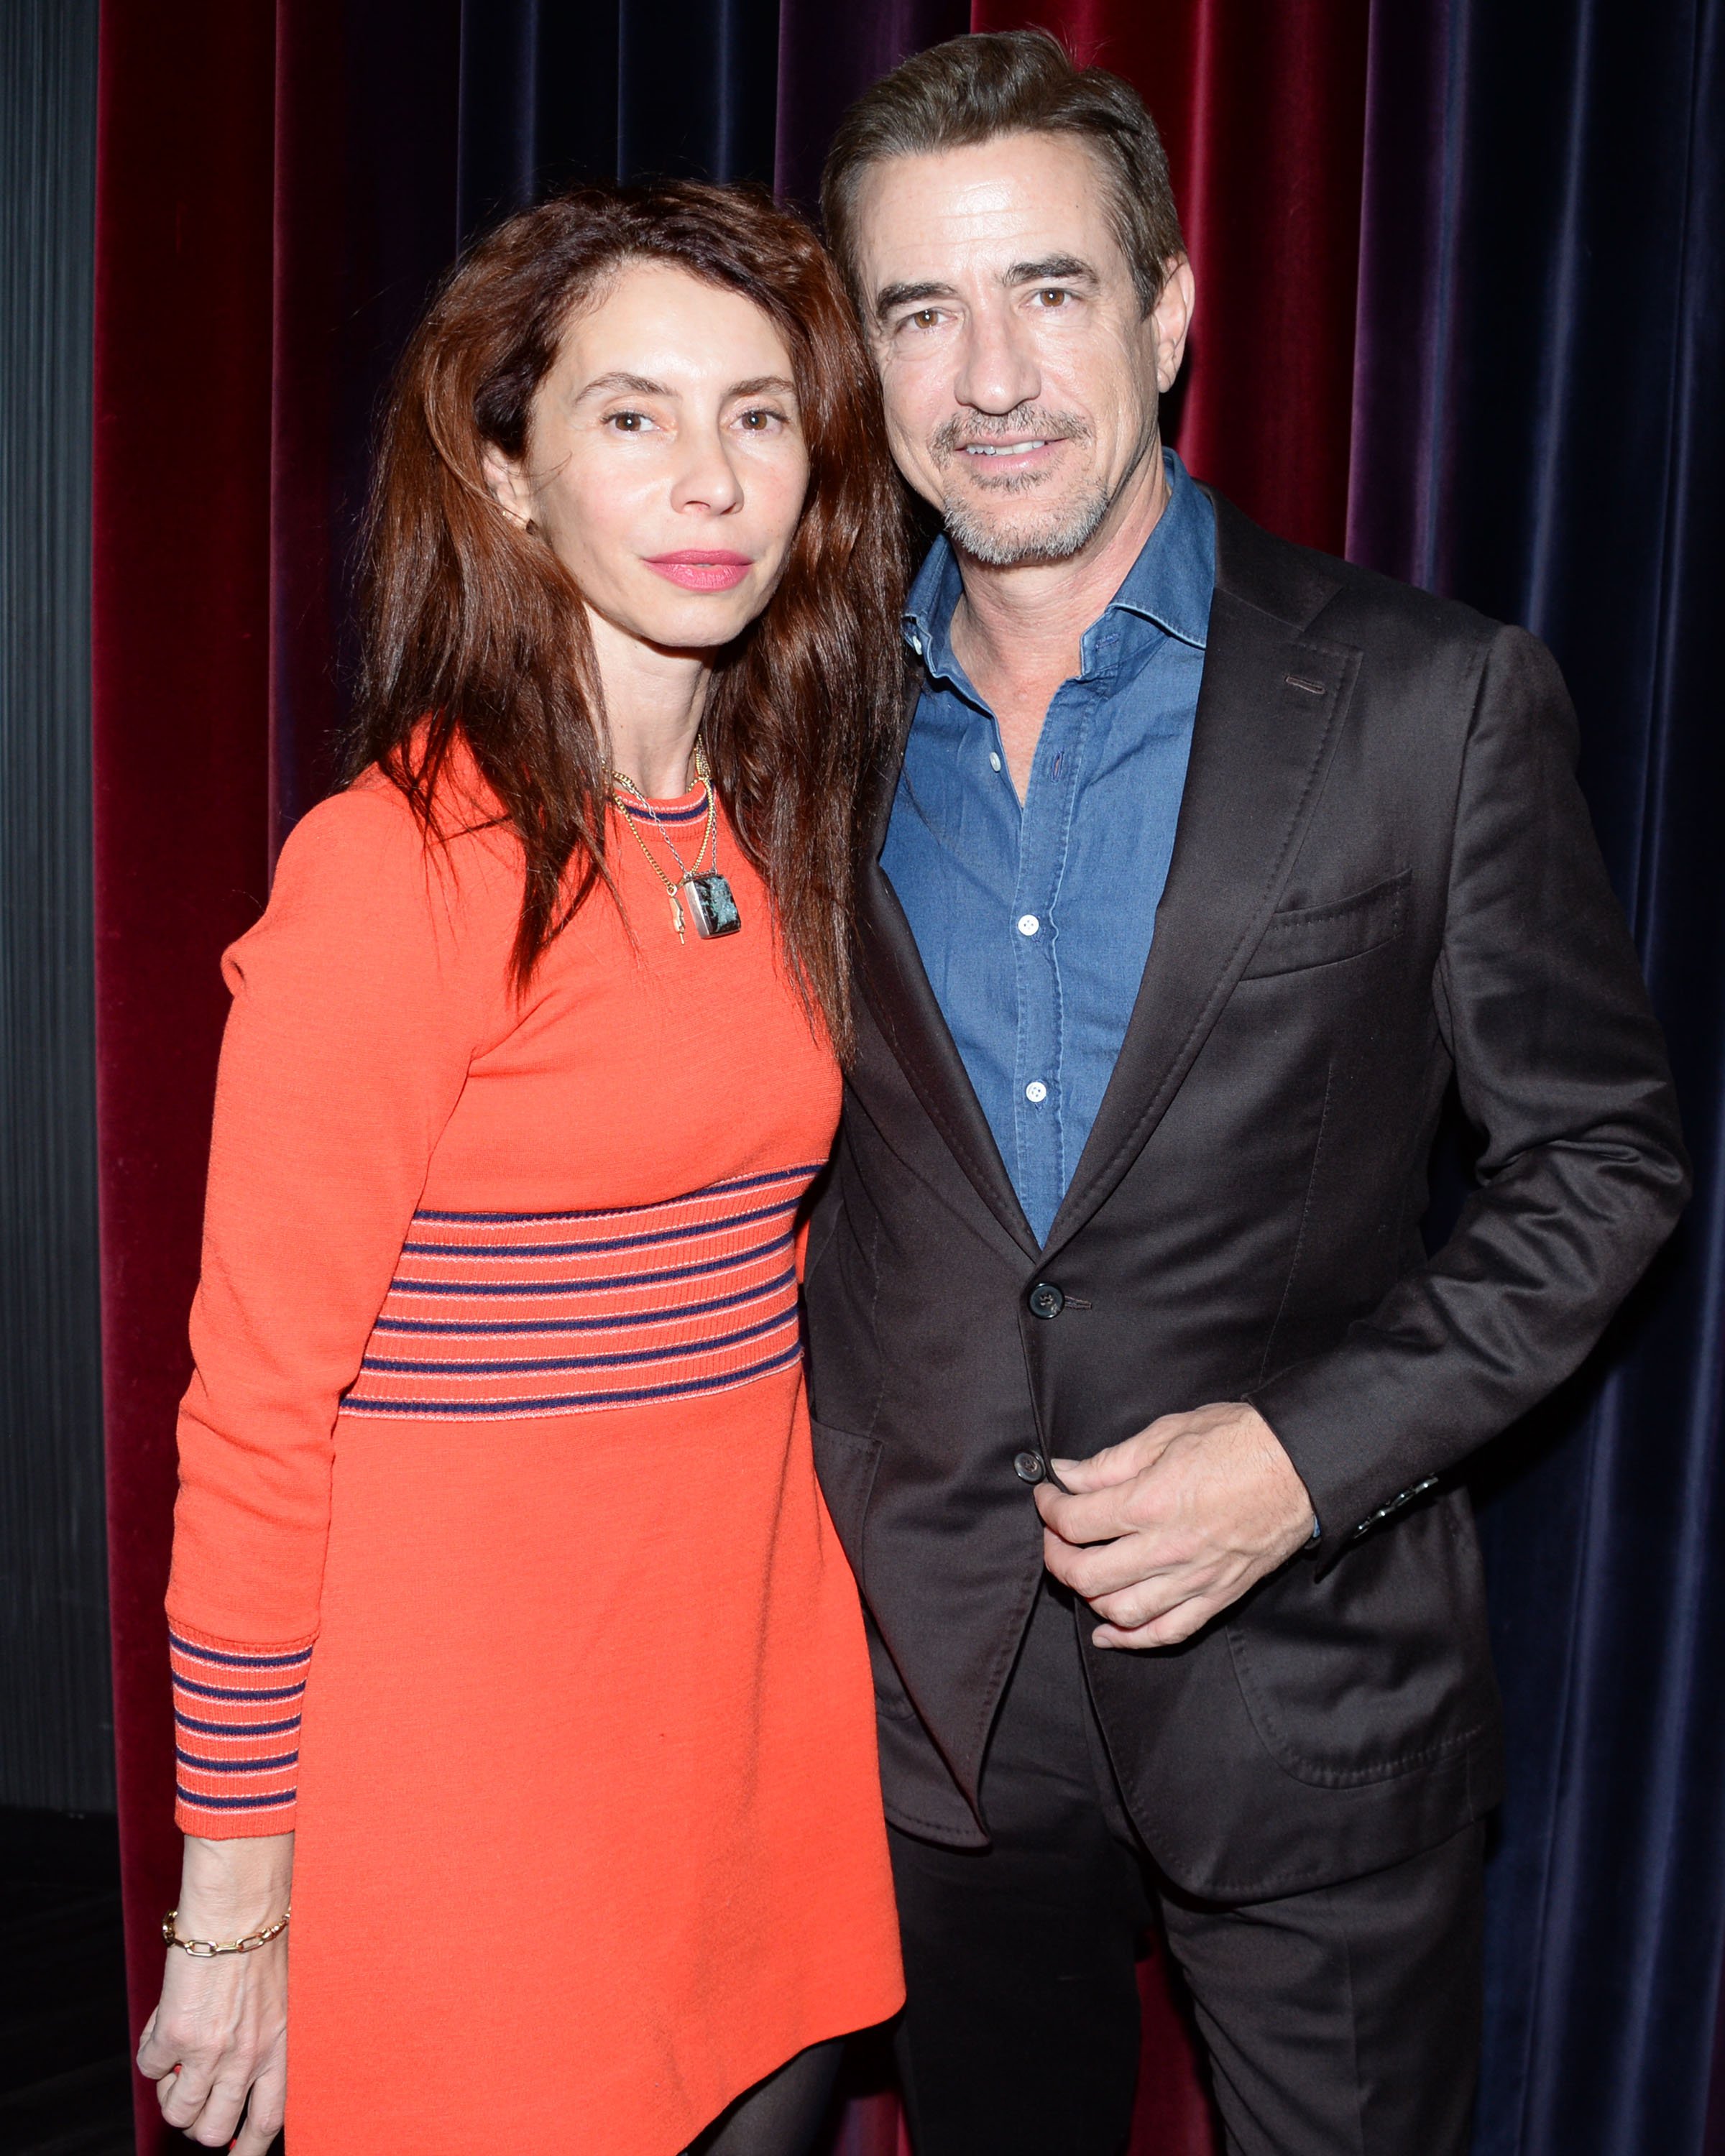 Tharita Cesaroni and Dermot Mulroney attend the After Party for Sony Pictures Classics' "Greed" on February 24, 2020, in New York City. | Source: Getty Images